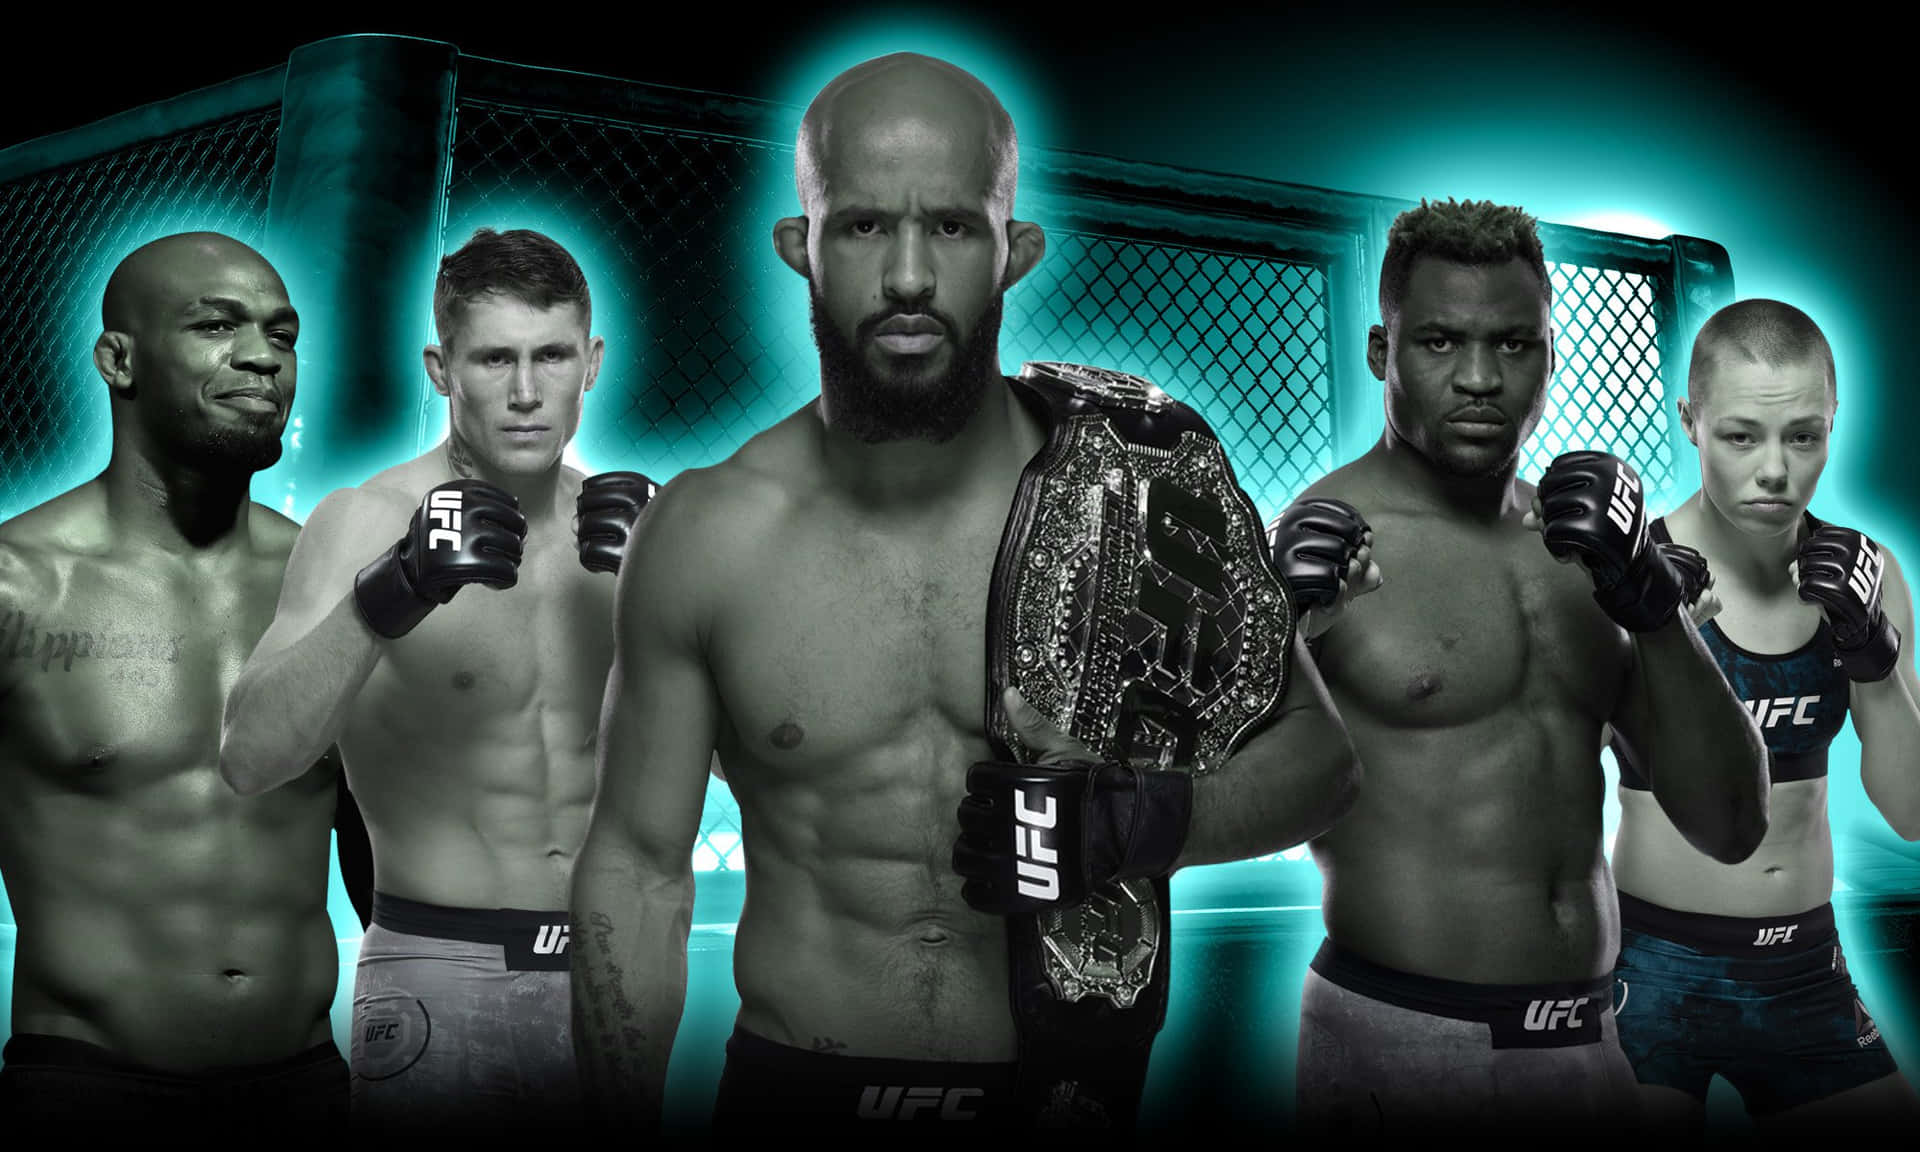 Demetrious Johnson With MMA Fighters Poster Wallpaper